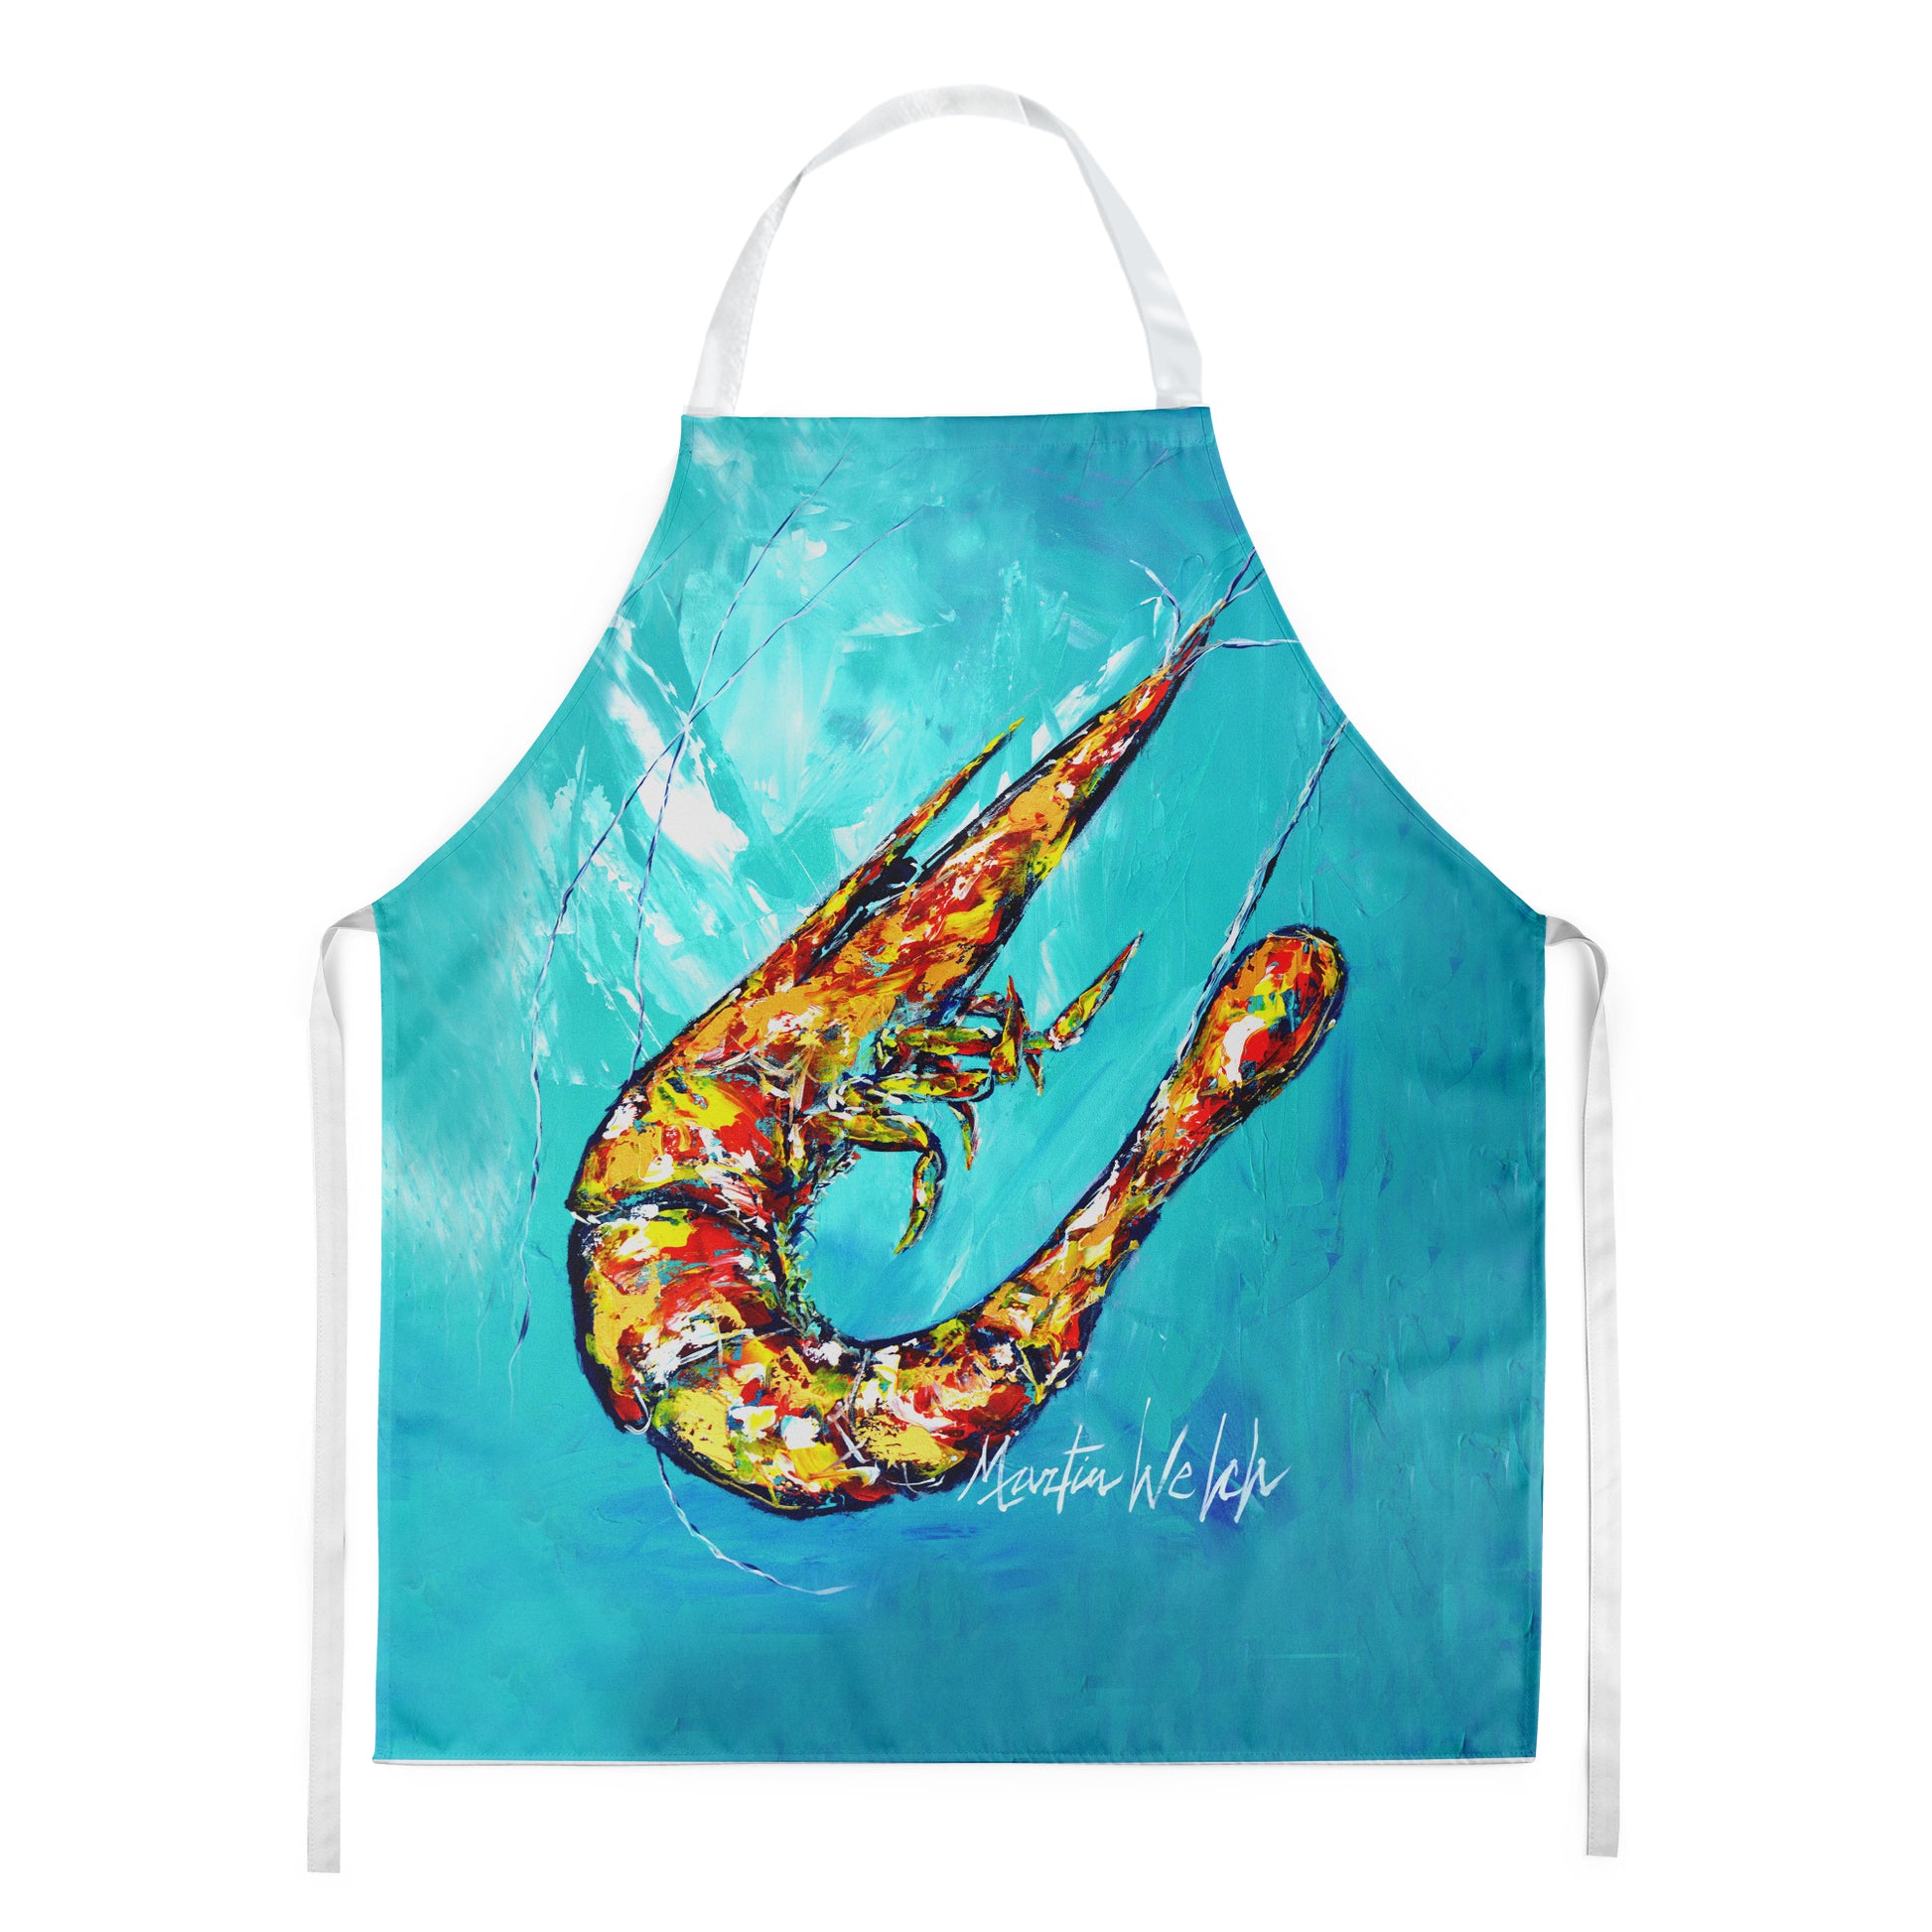 Buy this All That Jazz Teal Shrimp Apron